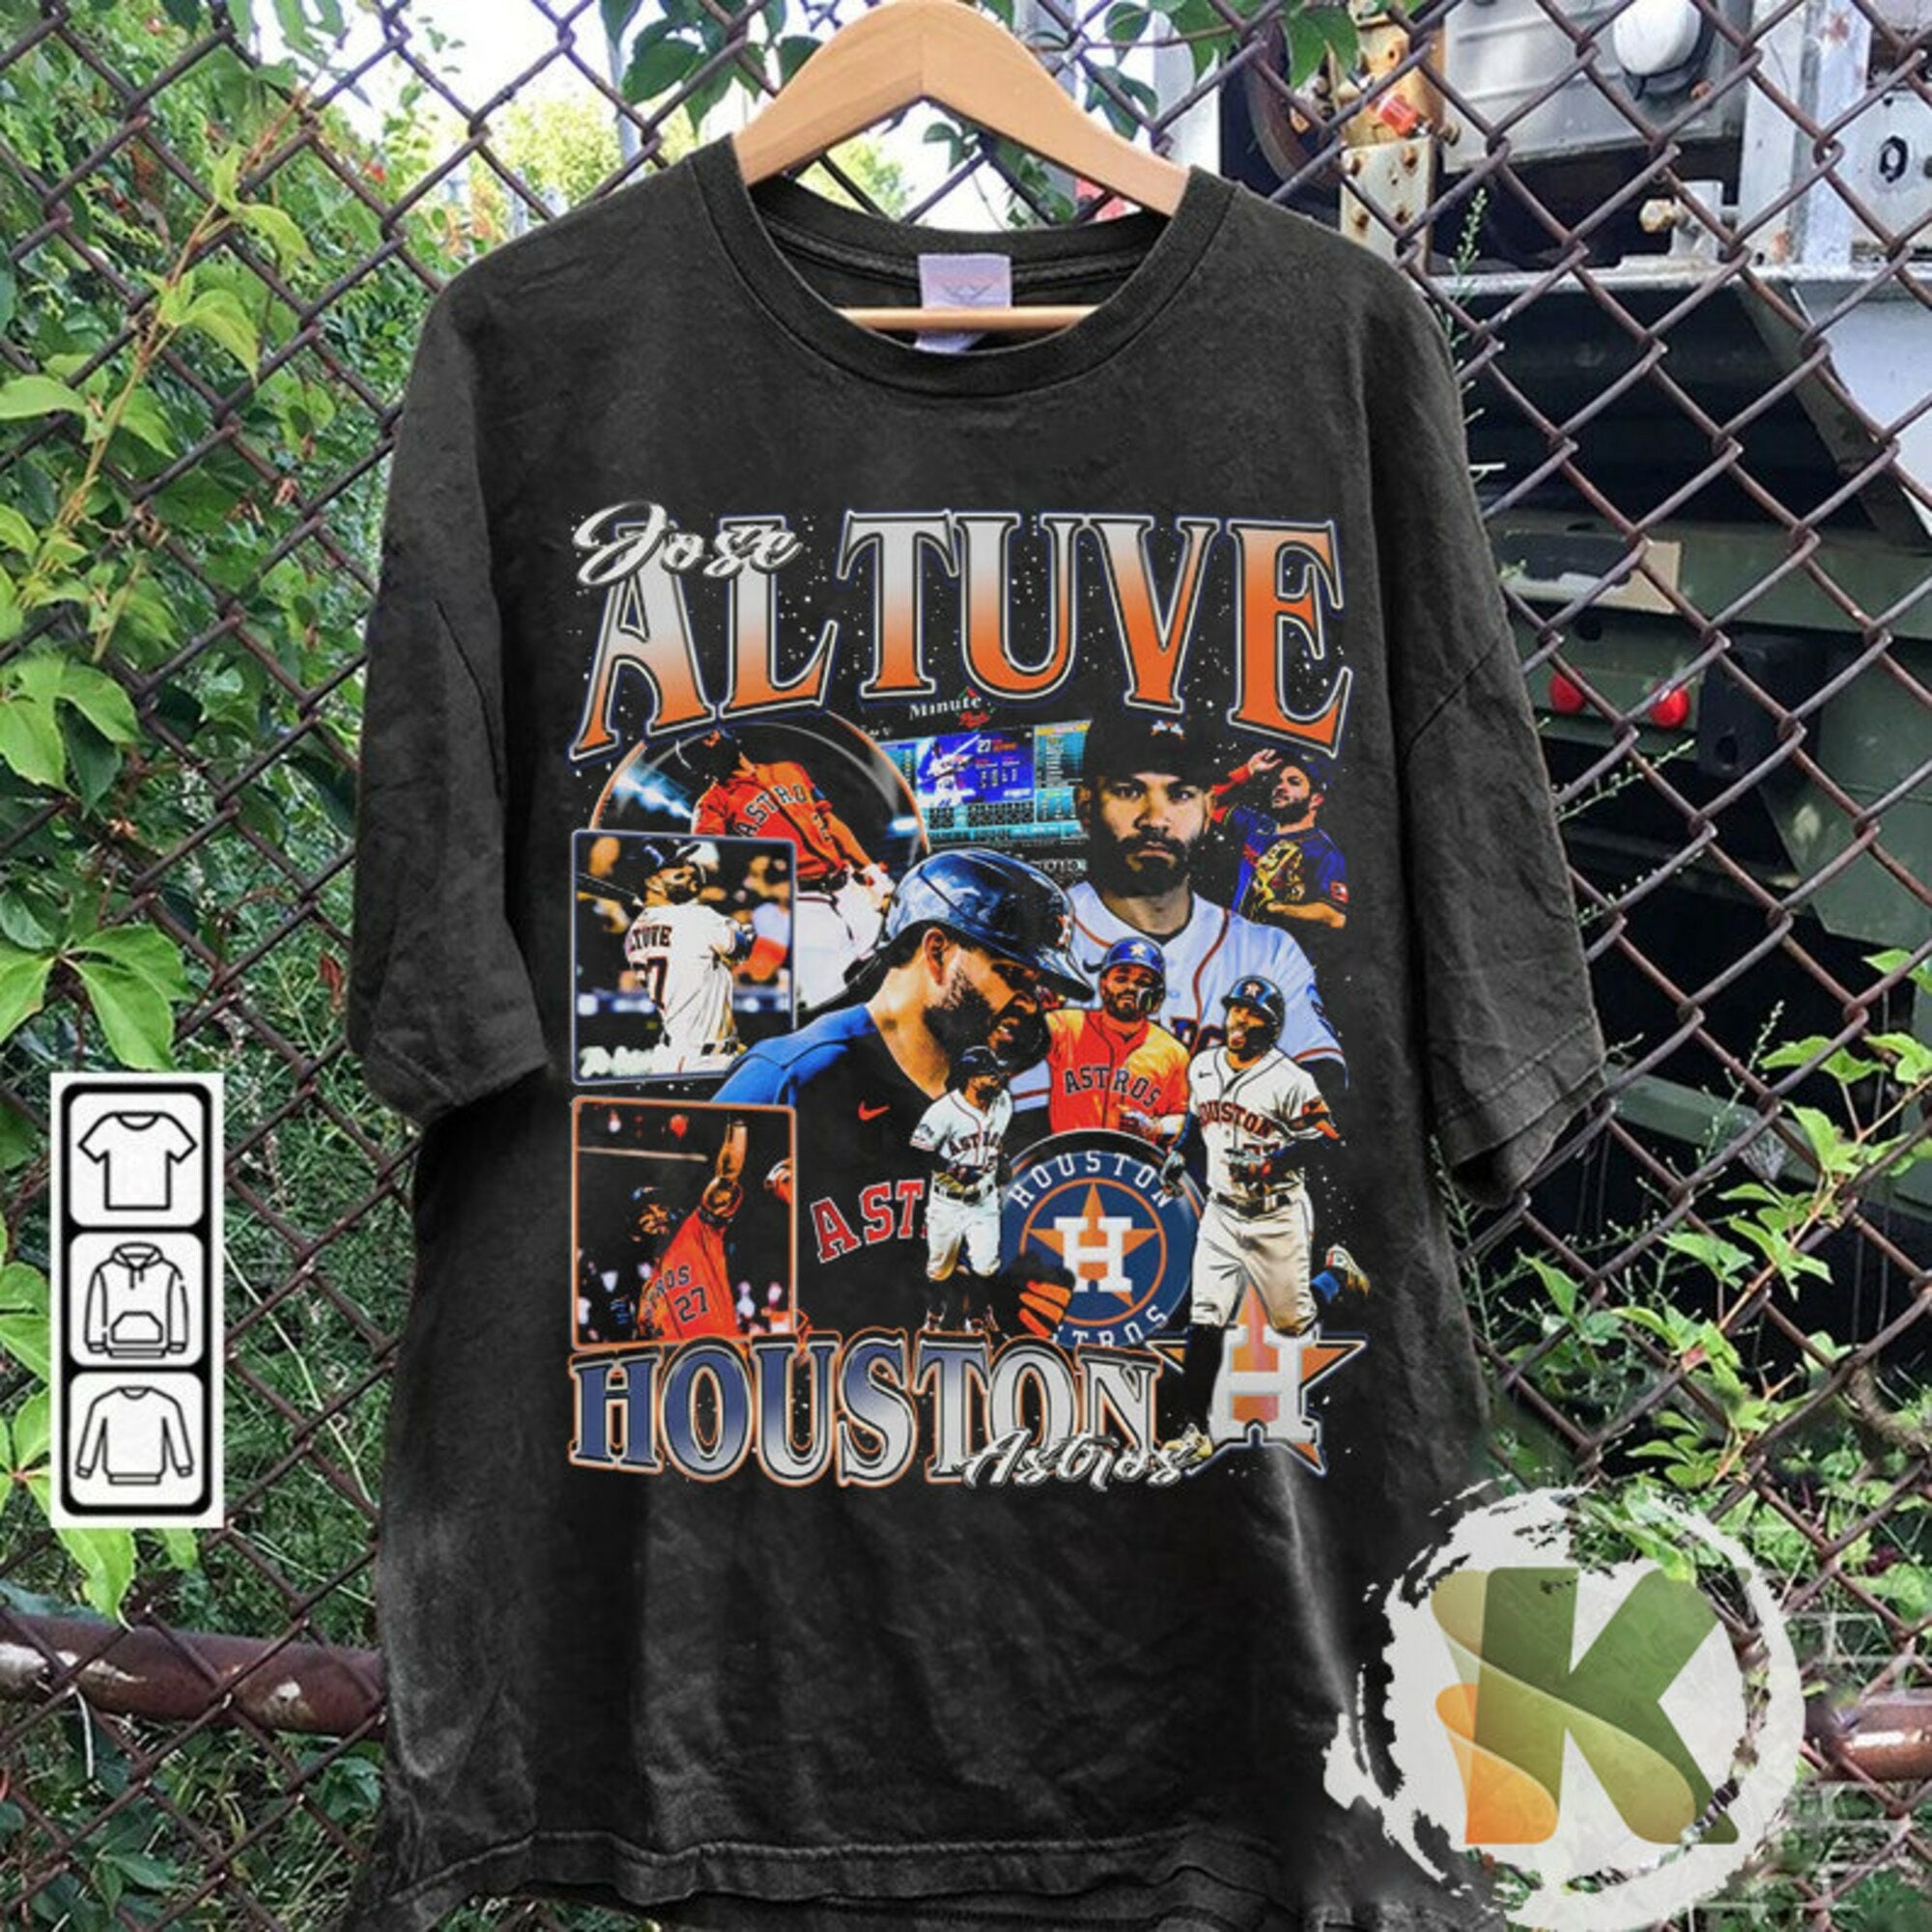 Astros T-Shirt Altuve Alvarez Verlander Signatures Houston Astros Gift -  Personalized Gifts: Family, Sports, Occasions, Trending